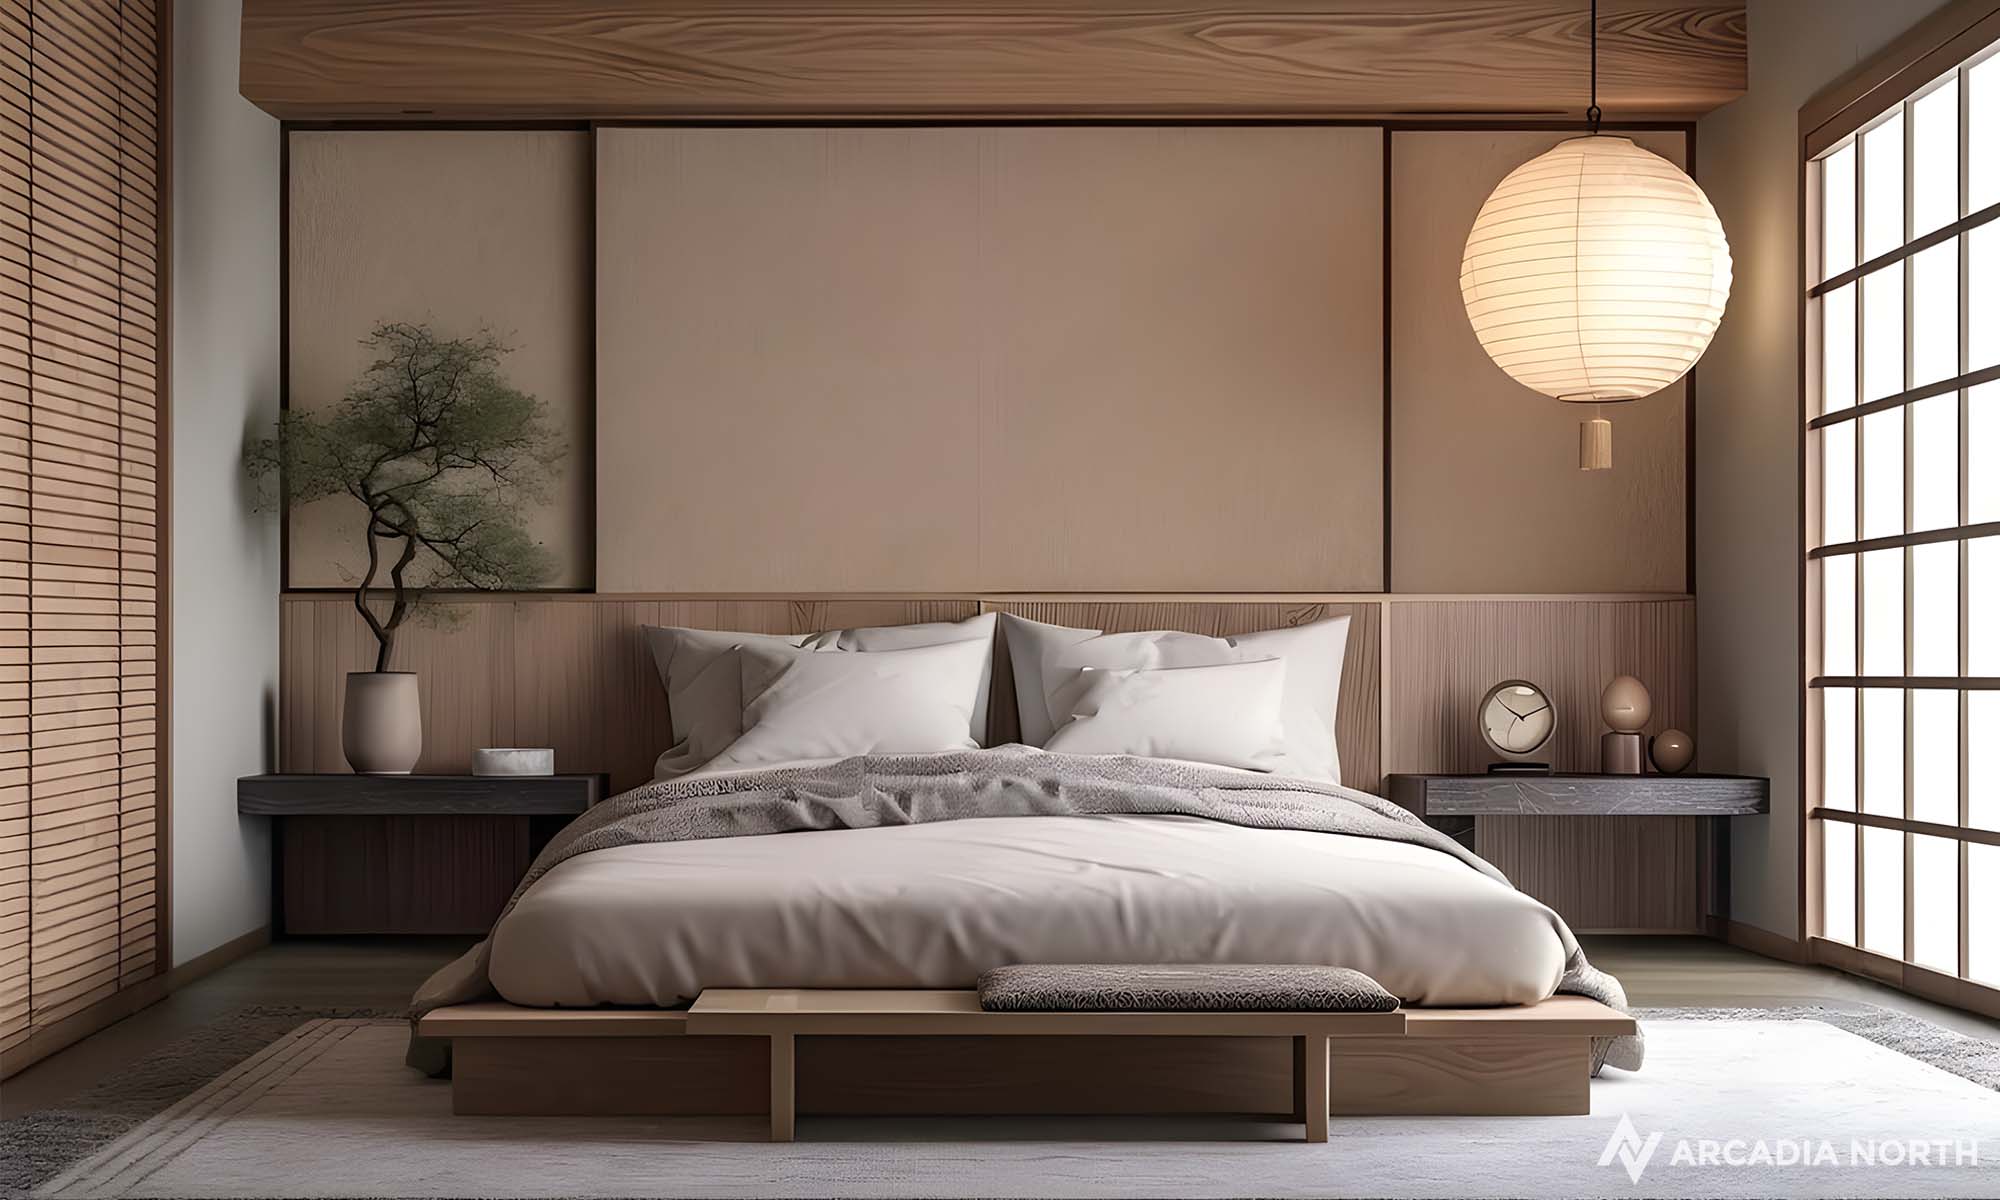 Modern Japanese style bedroom with an empty wall